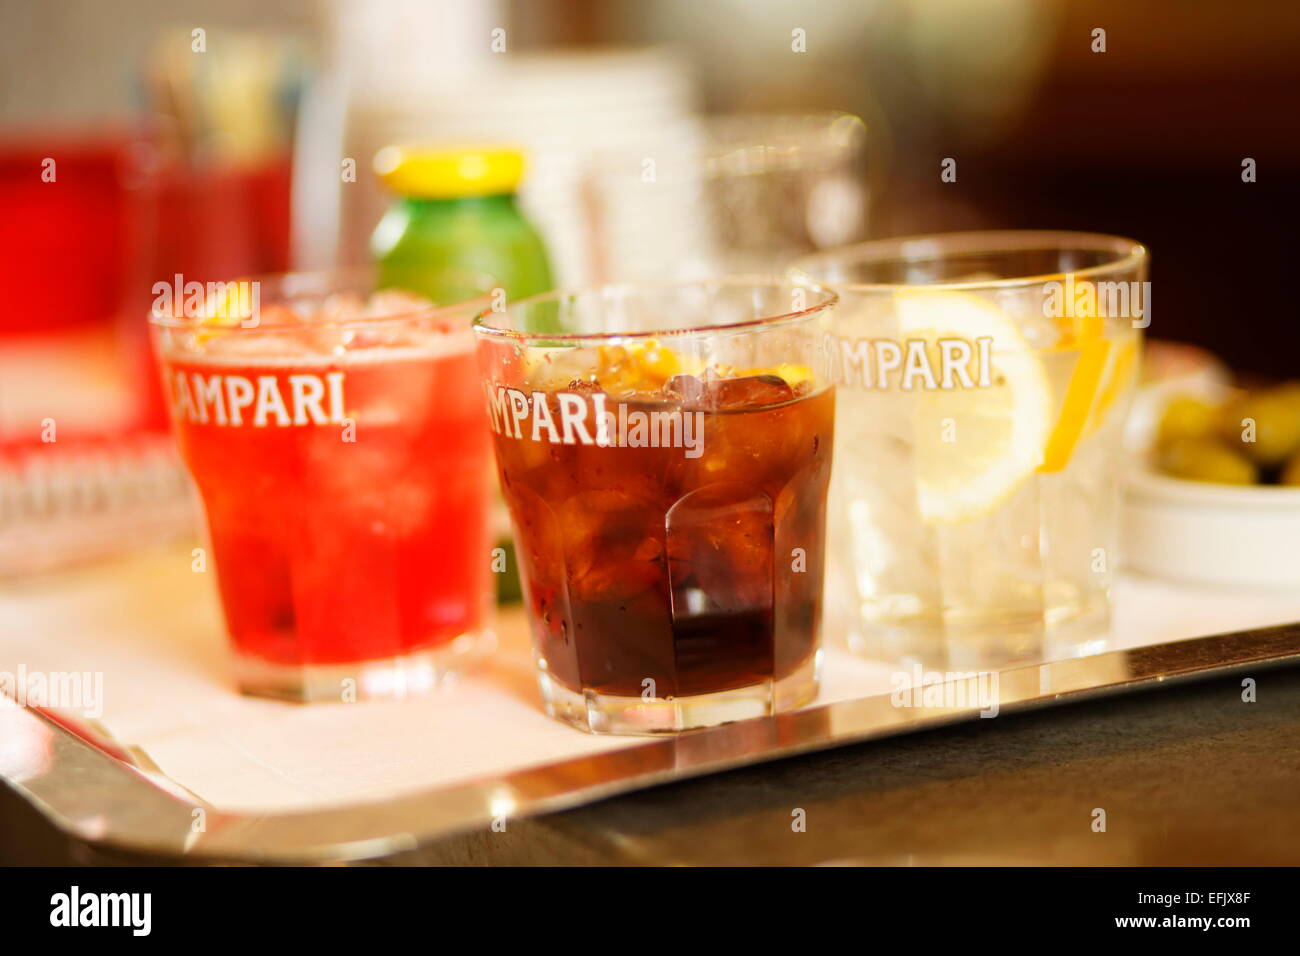 Several drinks served in a bar, Galleria Vittorio Emanuele II, Mailand, Lombardei, Italien Stock Photo